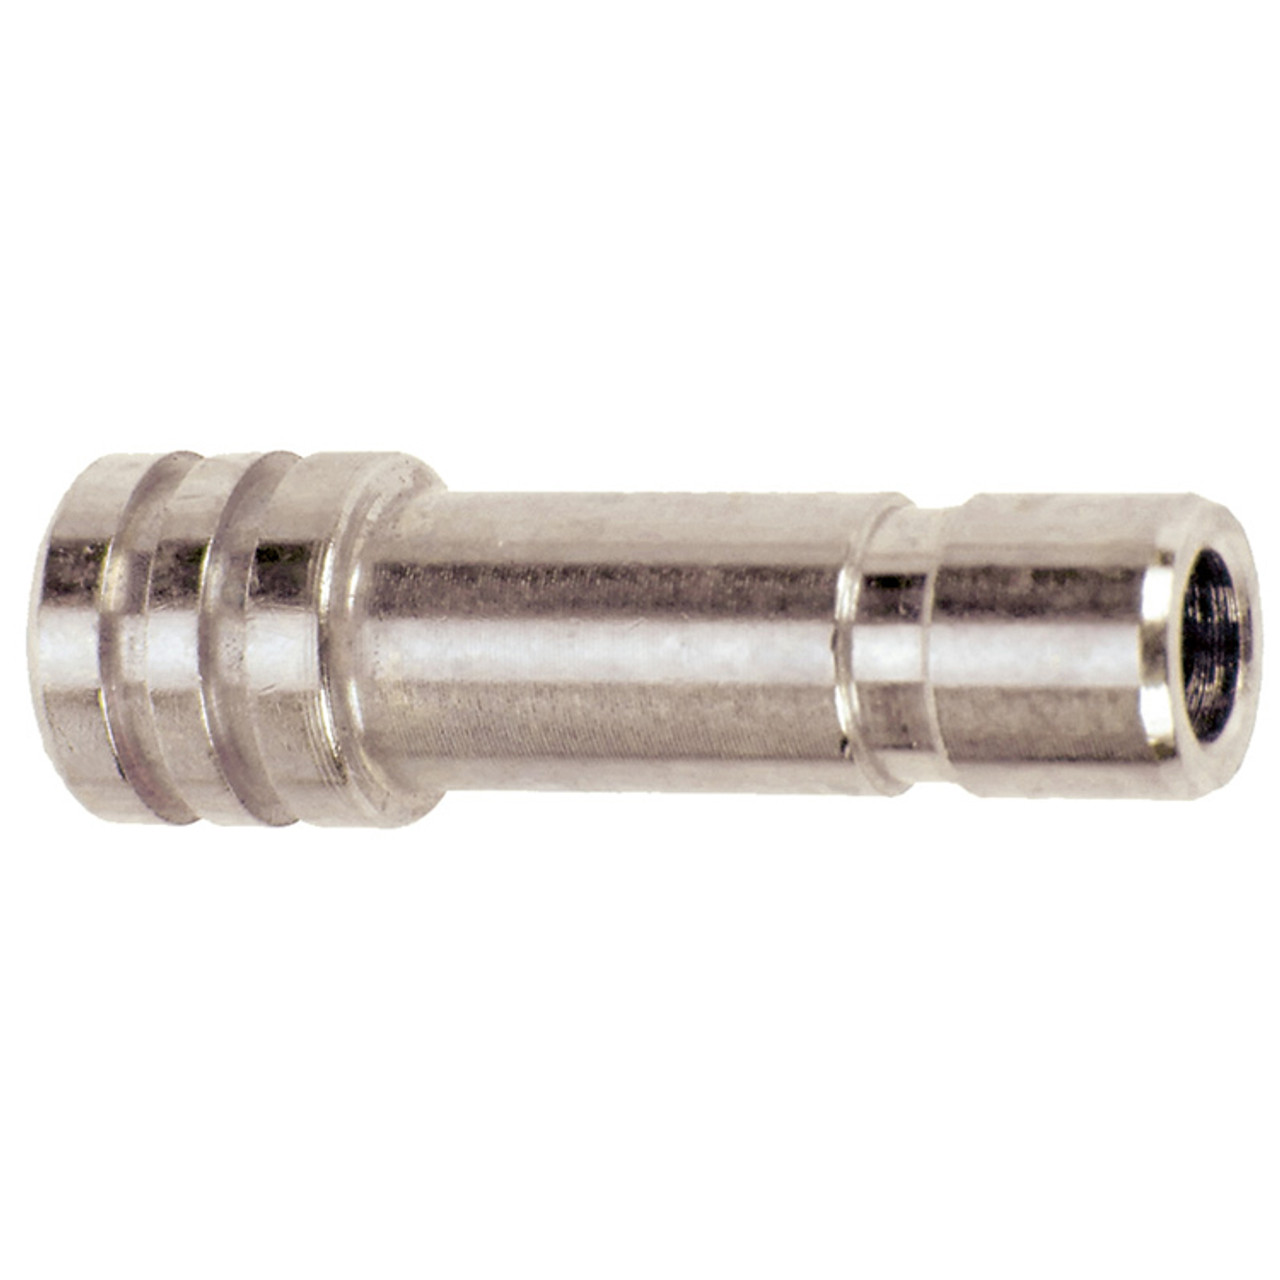 5/16" Nickel Plated Brass Push-To-Connect Plug   G6100P-05